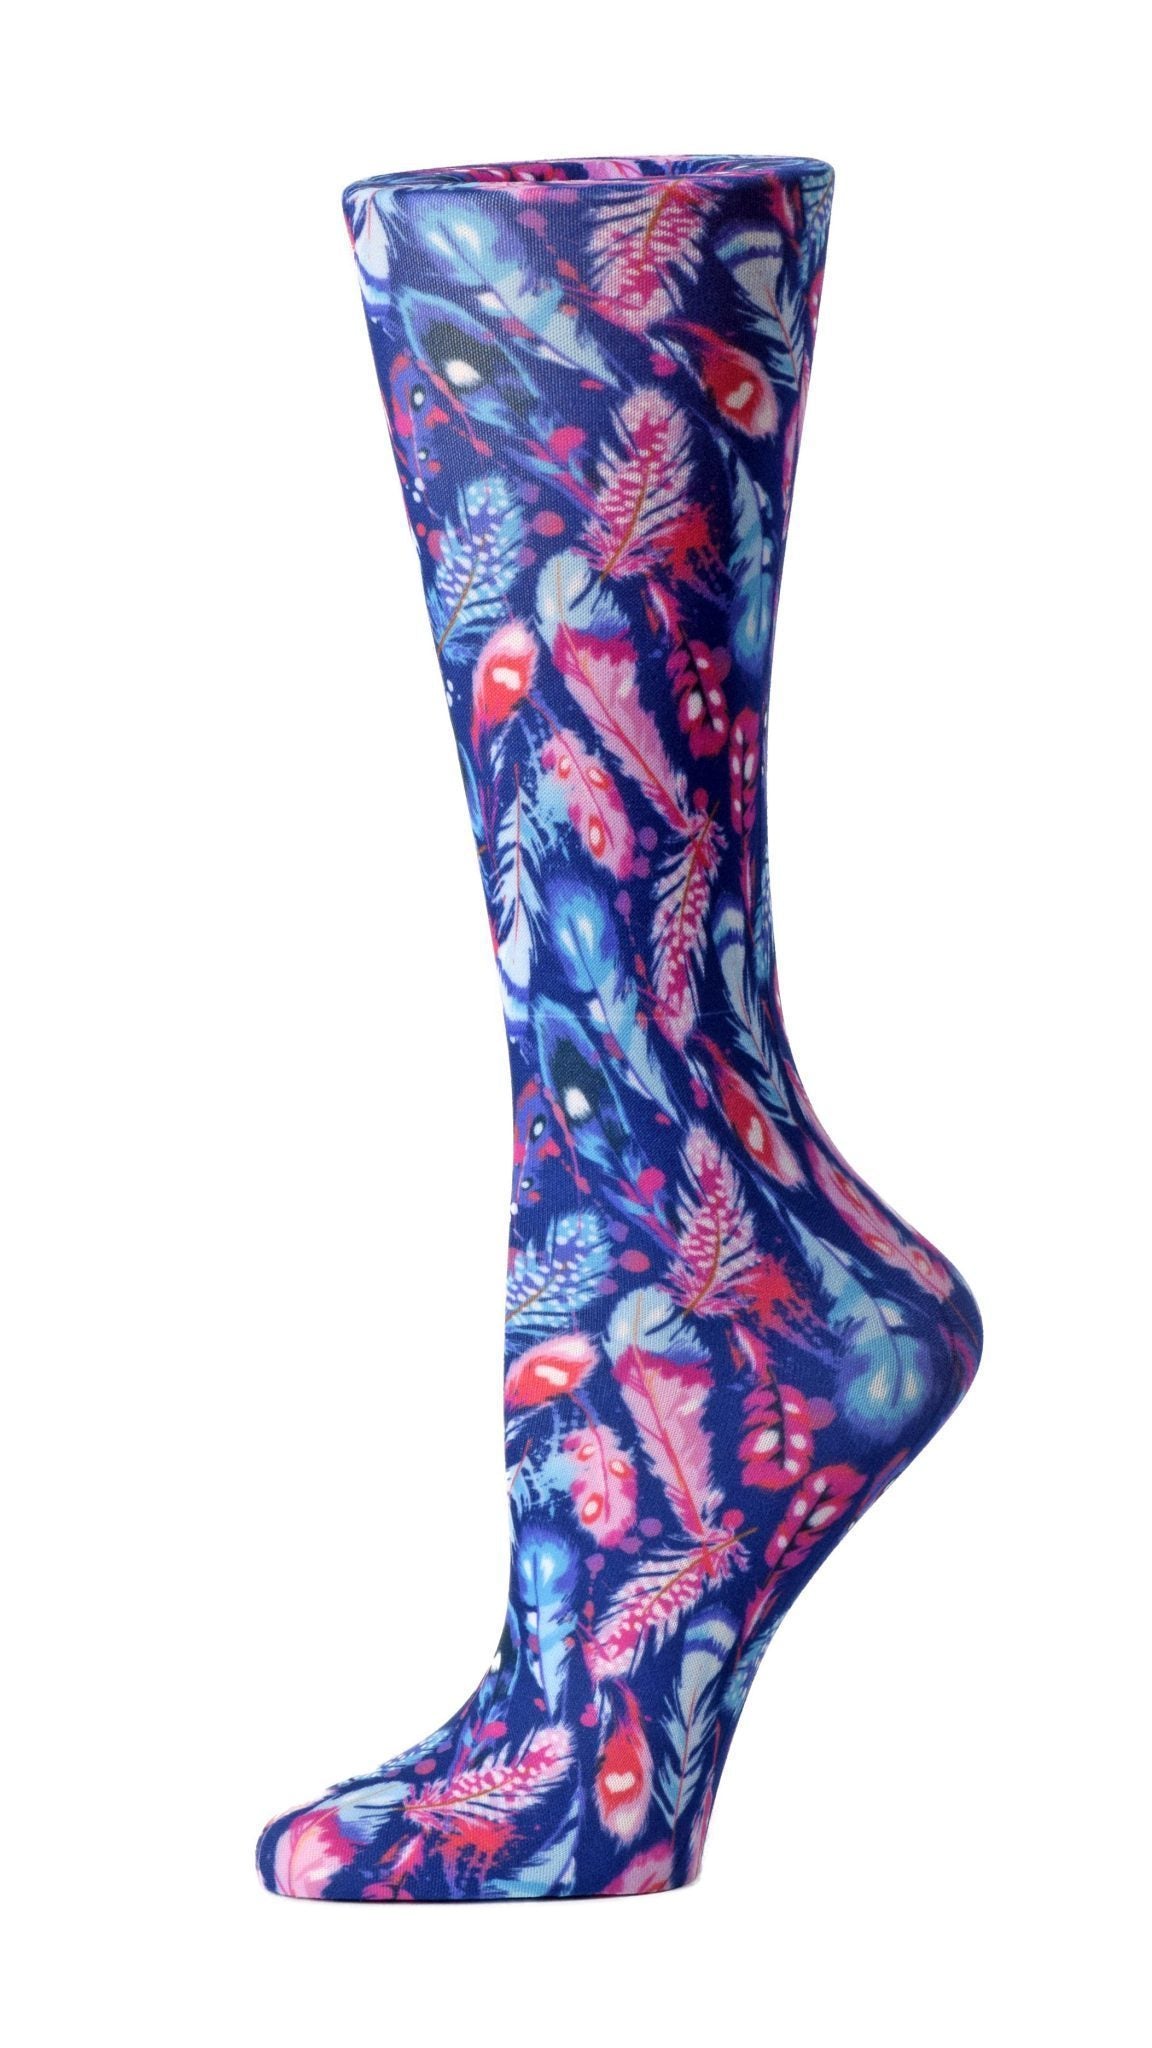 Cutieful Moderate Compression Socks 10-18 MMhg Wide Calf Knit Print Pattern Feathers at Parker's Clothing and Shoes.